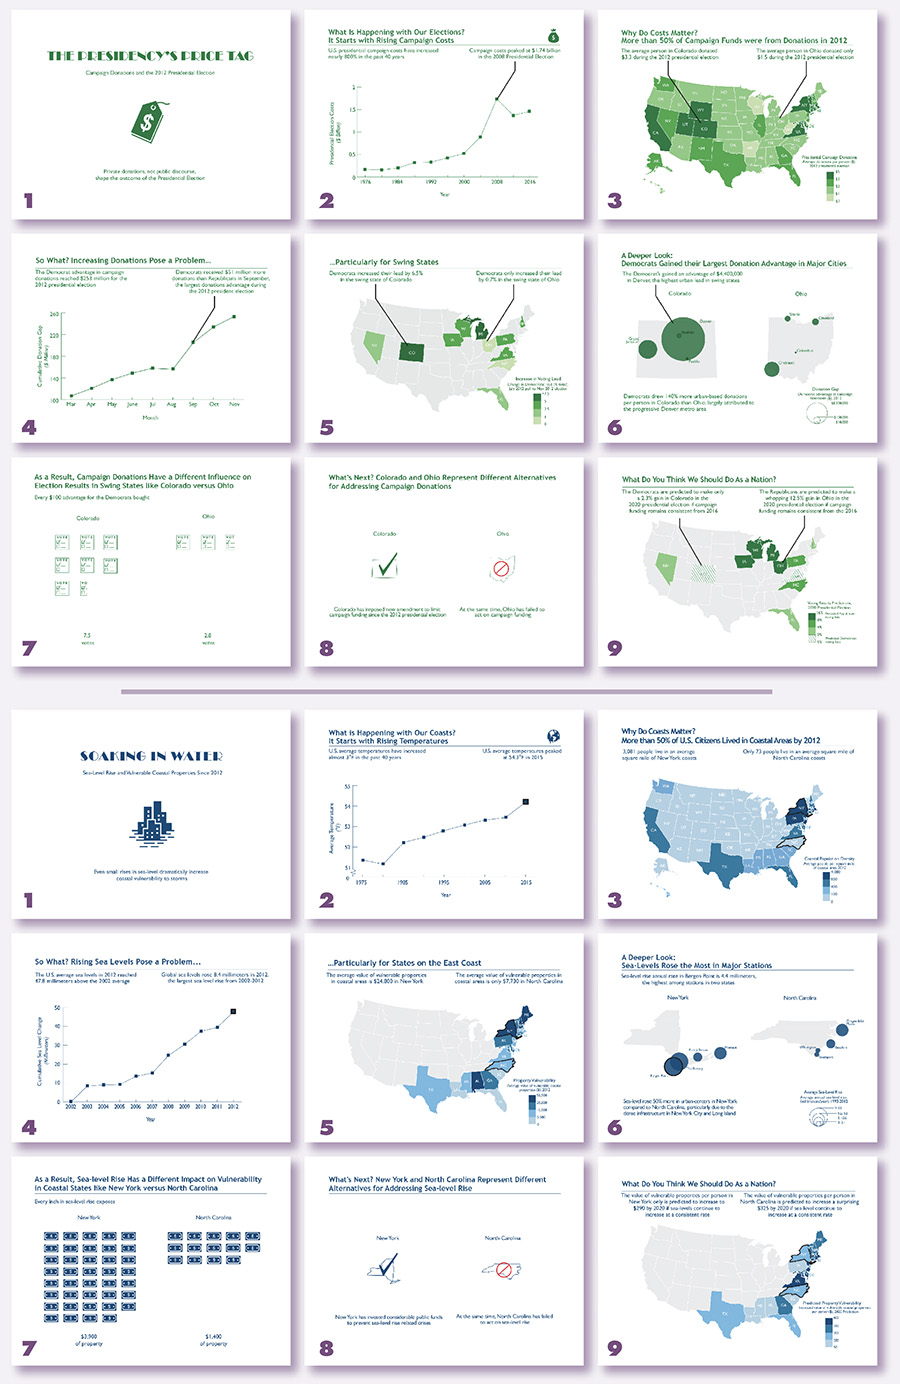 Figure 2. Visual Story Design. Both visual story themes were designed as a nine-panel sequence—with each panel representing a different narrative element (Table 1)—that could be presented as either a longform infographic or dynamic slideshow. Top: The US presidential campaign donations theme using leader lines. Bottom: The US sea level rise theme using color highlighting. High resolution versions of all tested materials are available as supplemental materials.